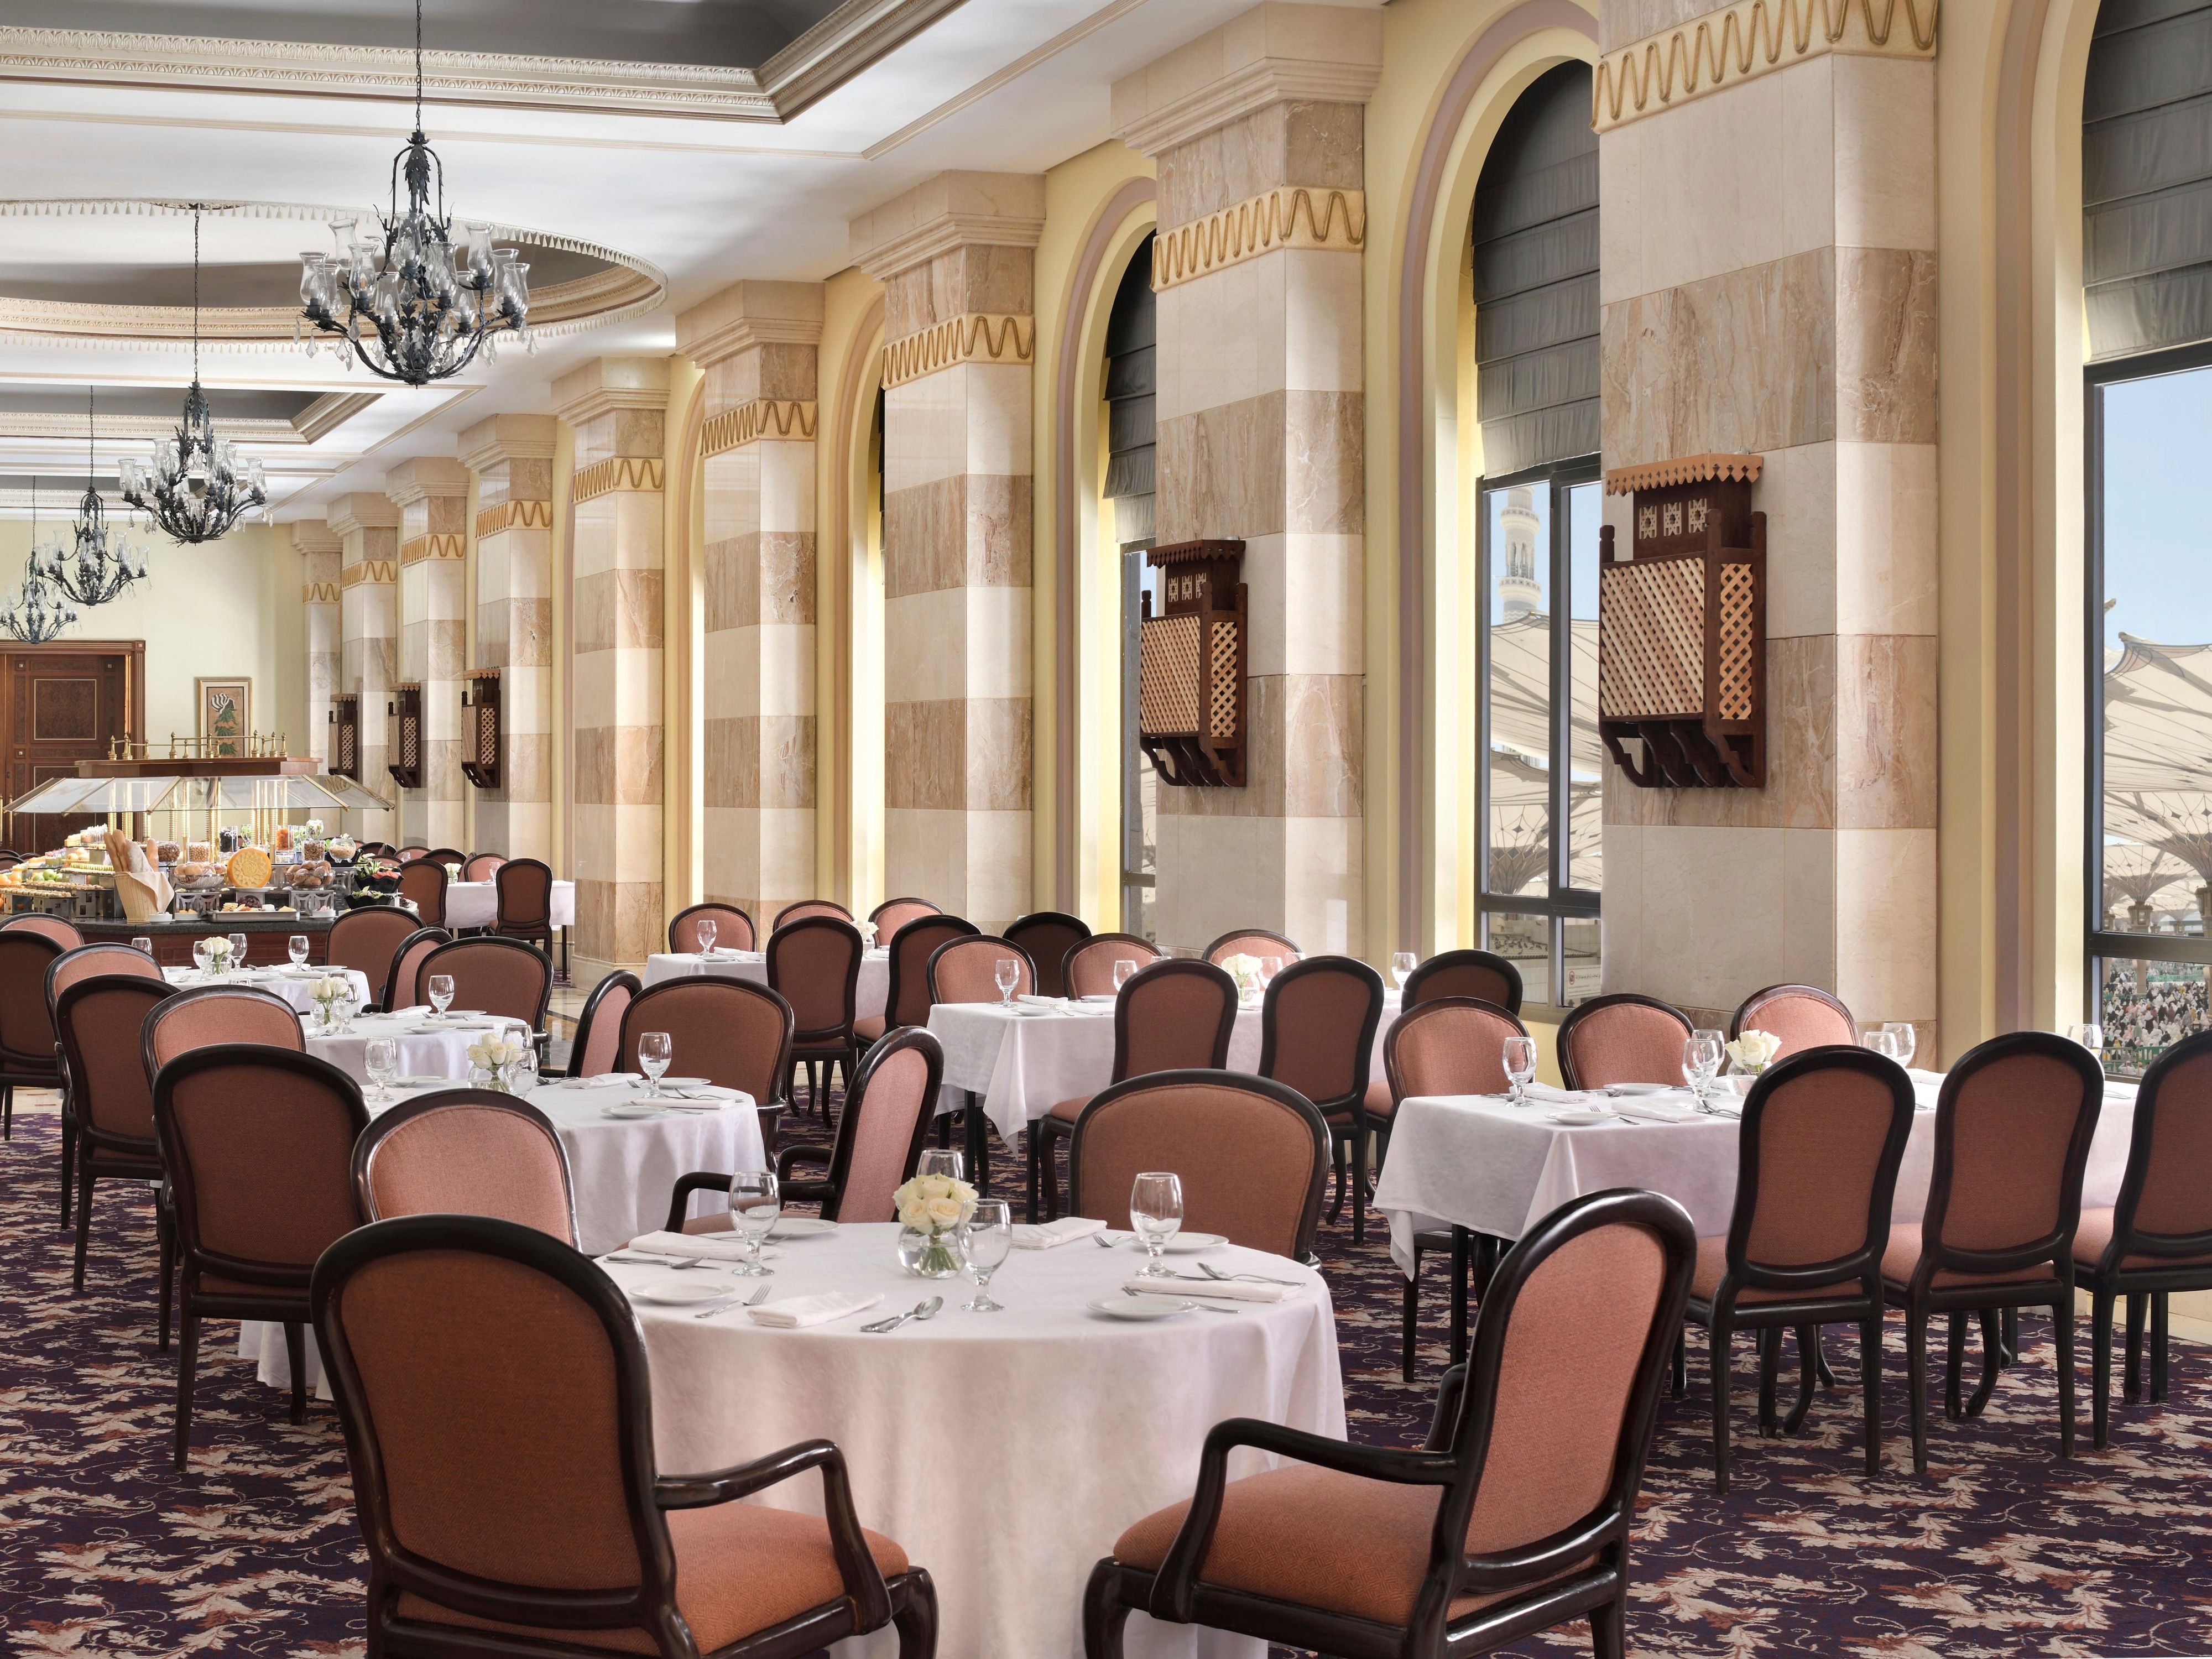 Our Rotana restaurant is a great place for family celebrations